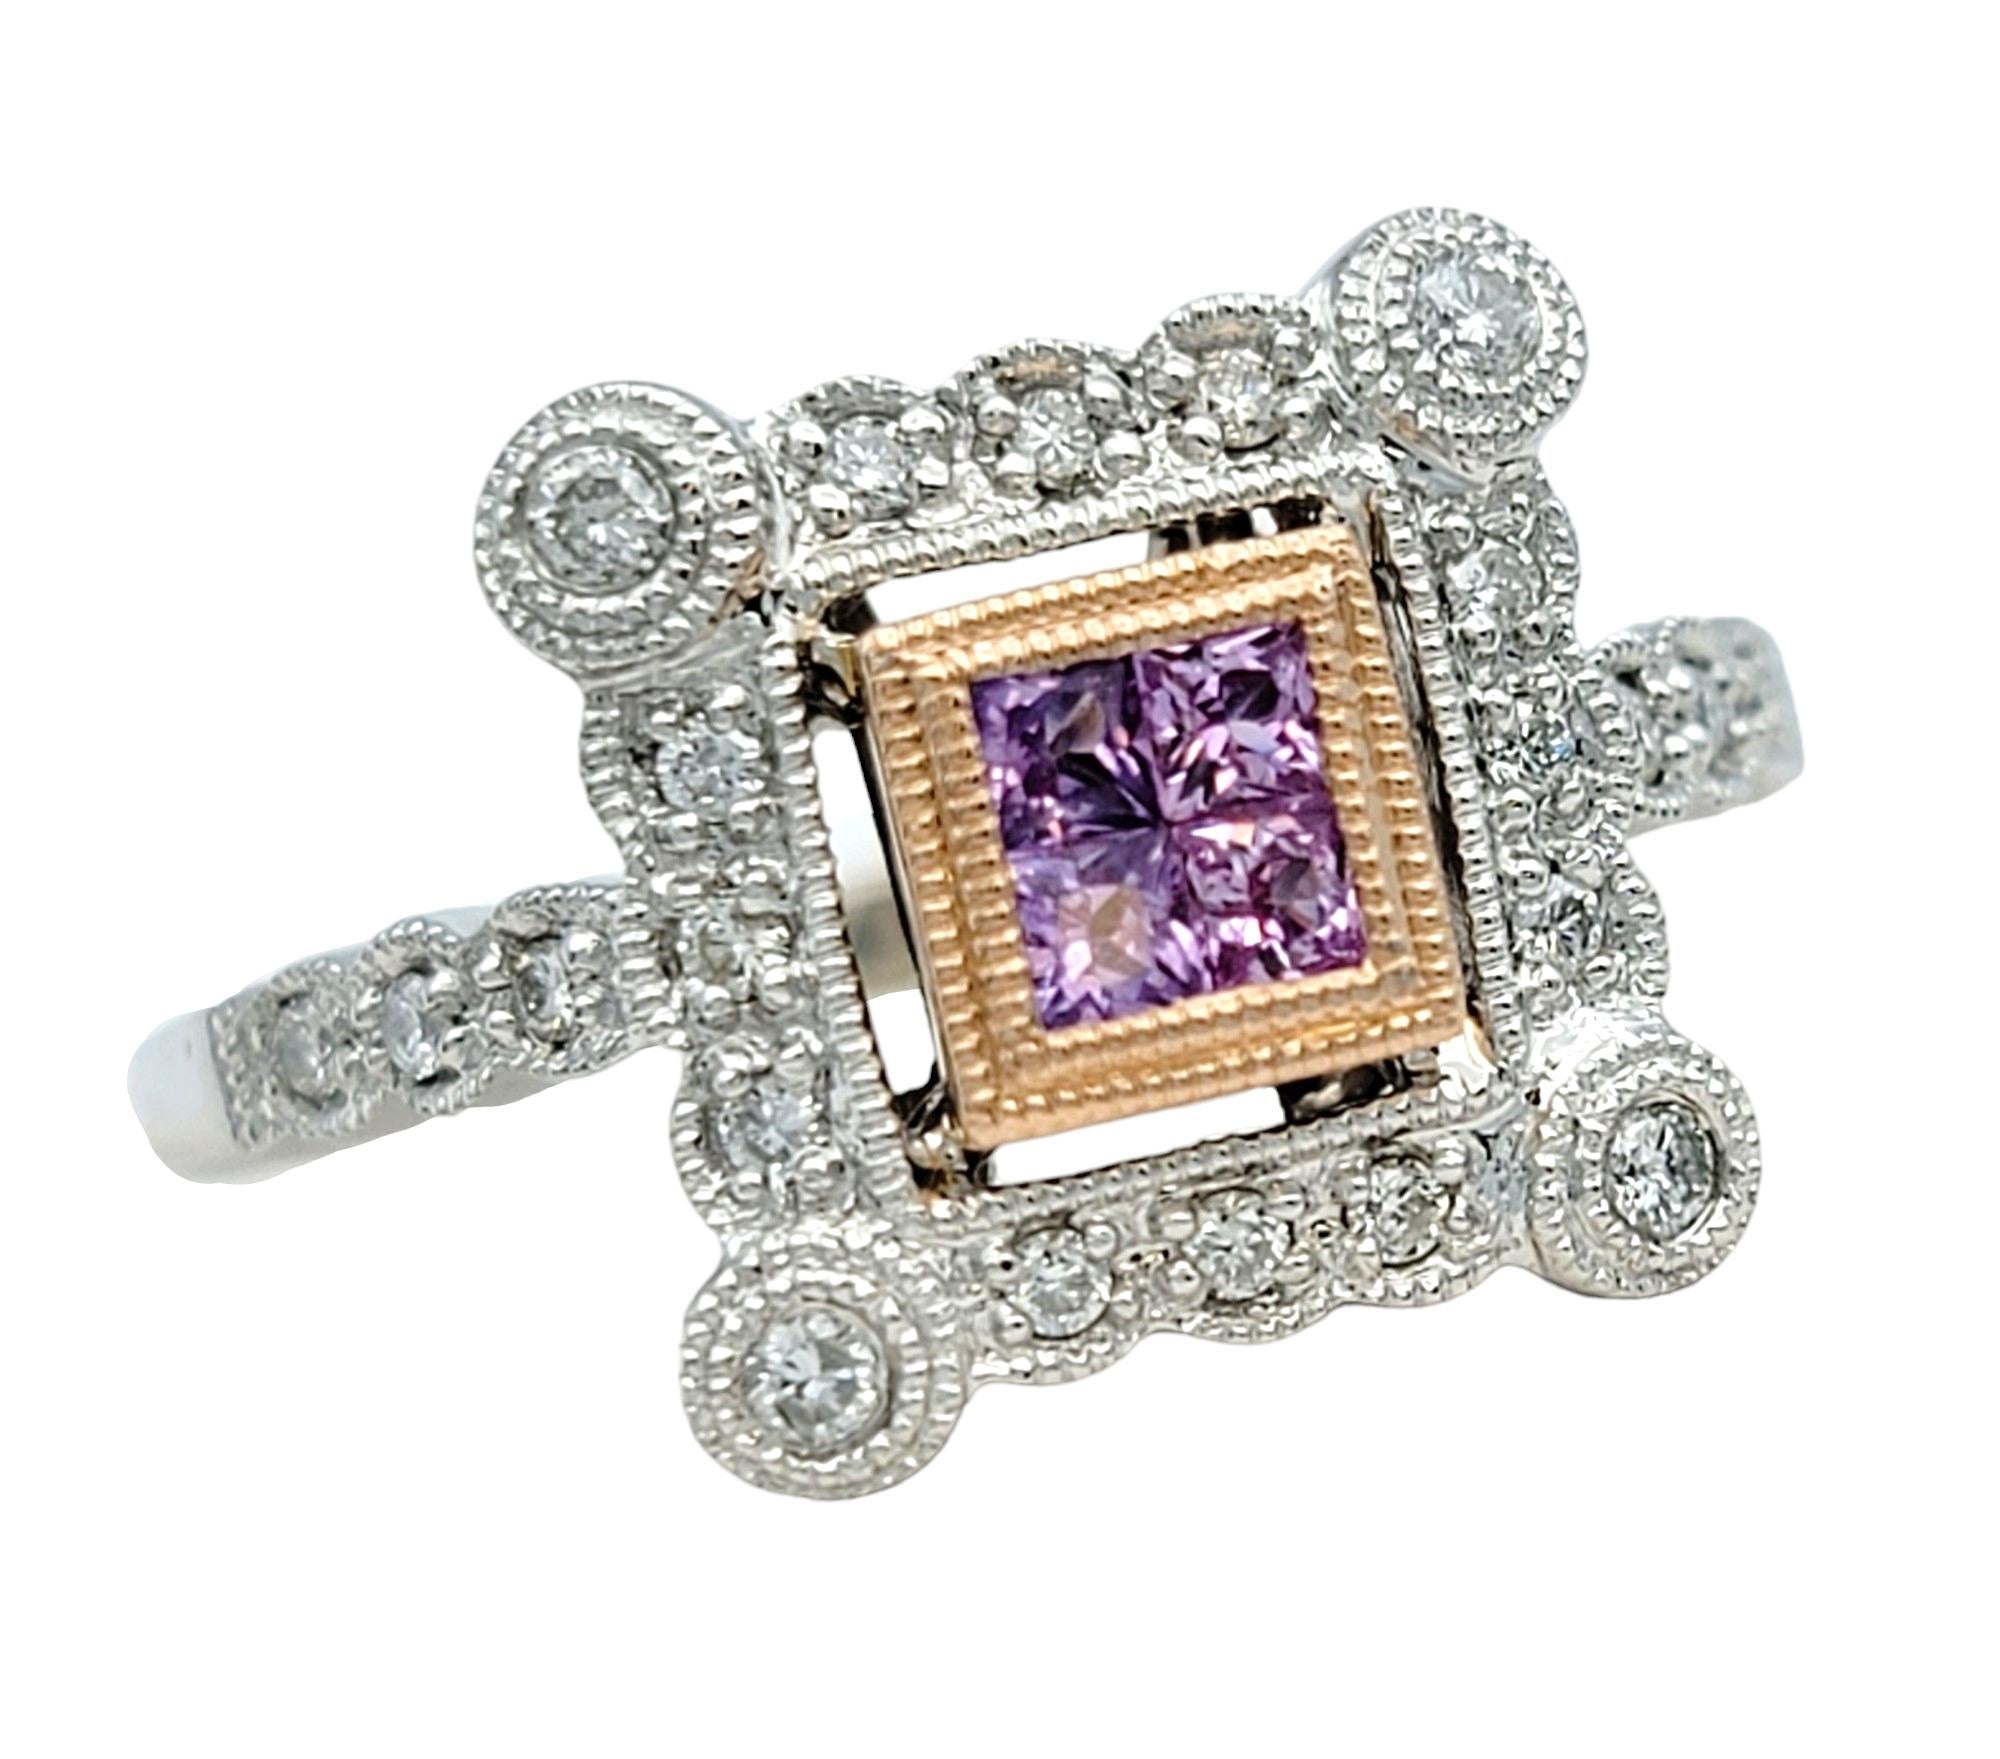 Ring Size: 7

Exuding feminine charm and elegance, this pink sapphire and diamond ring showcases a captivating design crafted in 14 karat gold. At the heart of the ring, four square pink sapphires are artfully arranged in an invisible setting,